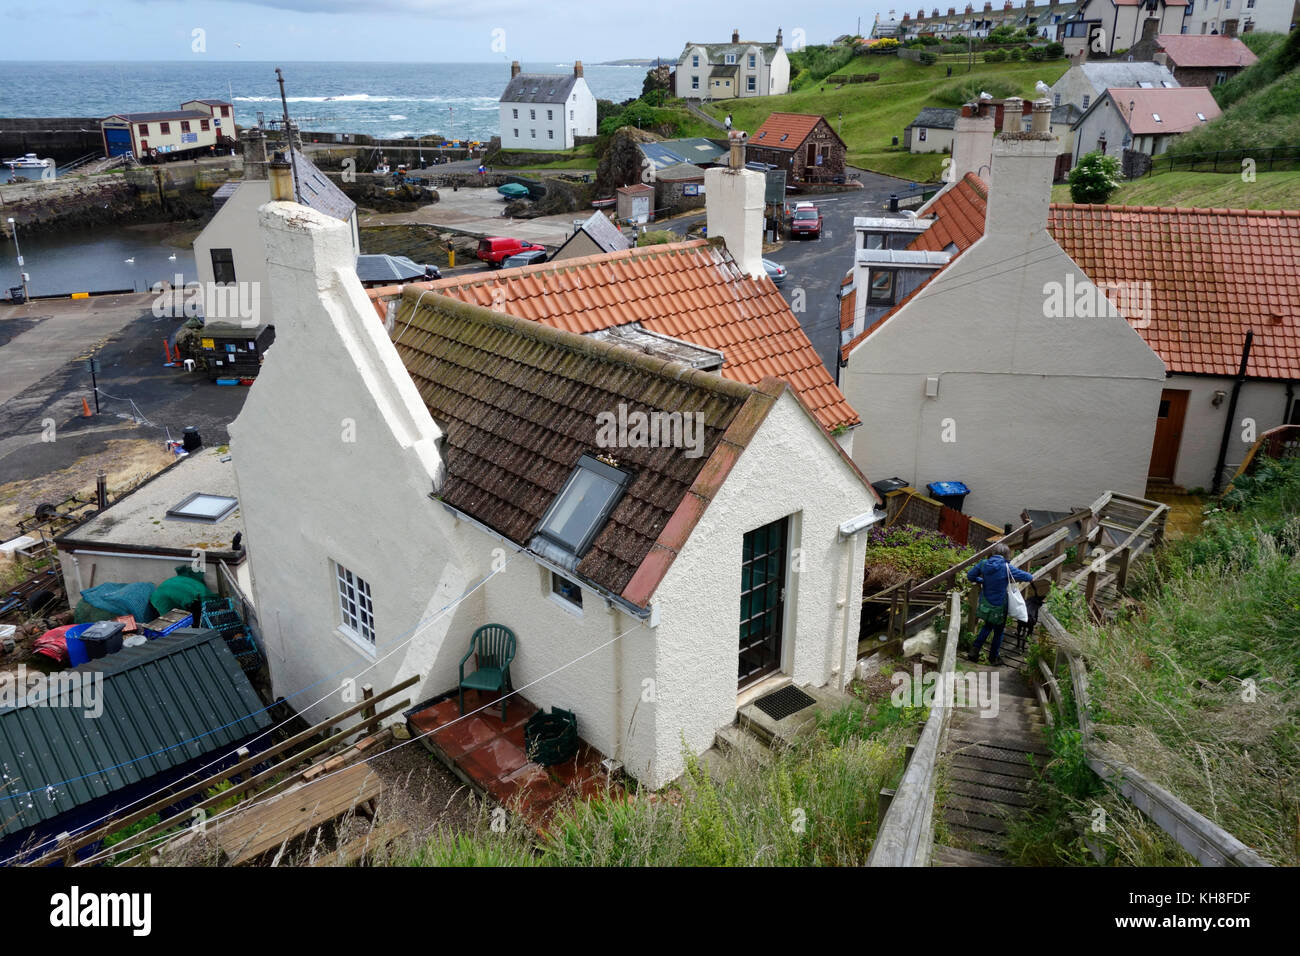 Harbour cottages a st abbs Foto Stock